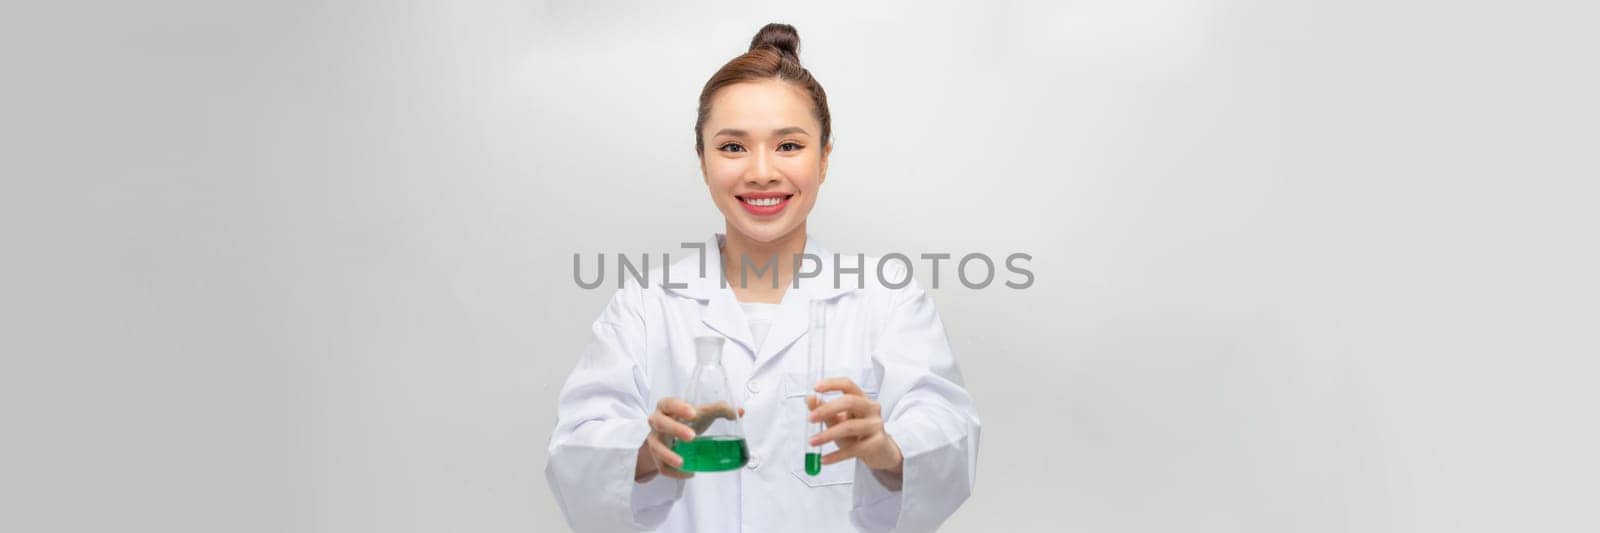 Female scientist in lab coat with chemical glassware. Isolated on white.